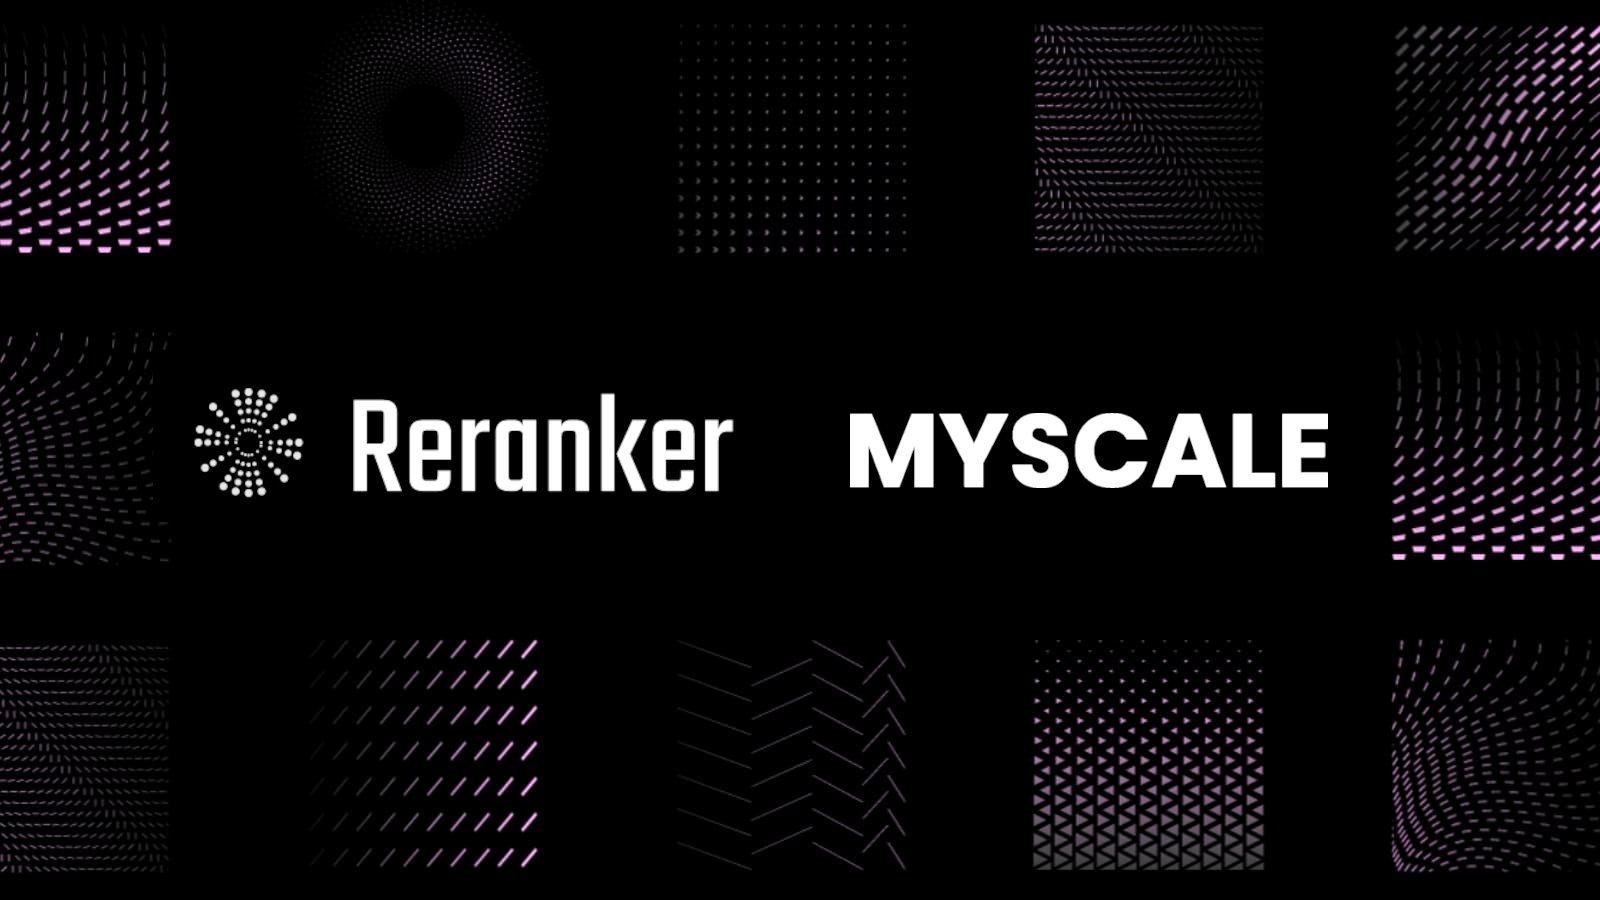 Black background with the stylized white text "RANKER" and "MYSCALE," suggesting a modern brand design.